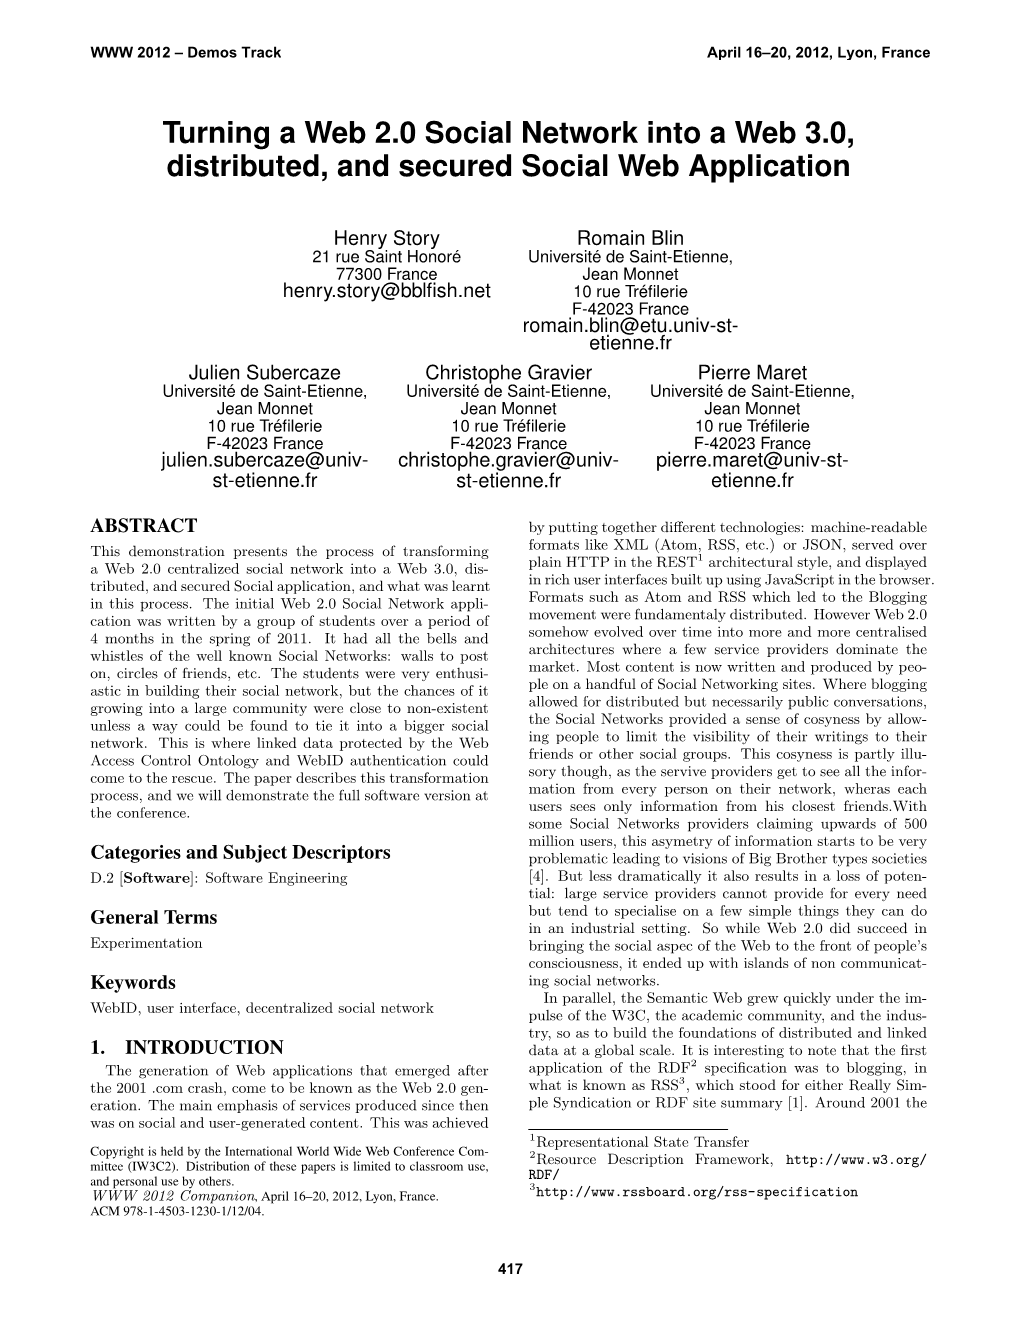 Turning a Web 2.0 Social Network Into a Web 3.0, Distributed, and Secured Social Web Application